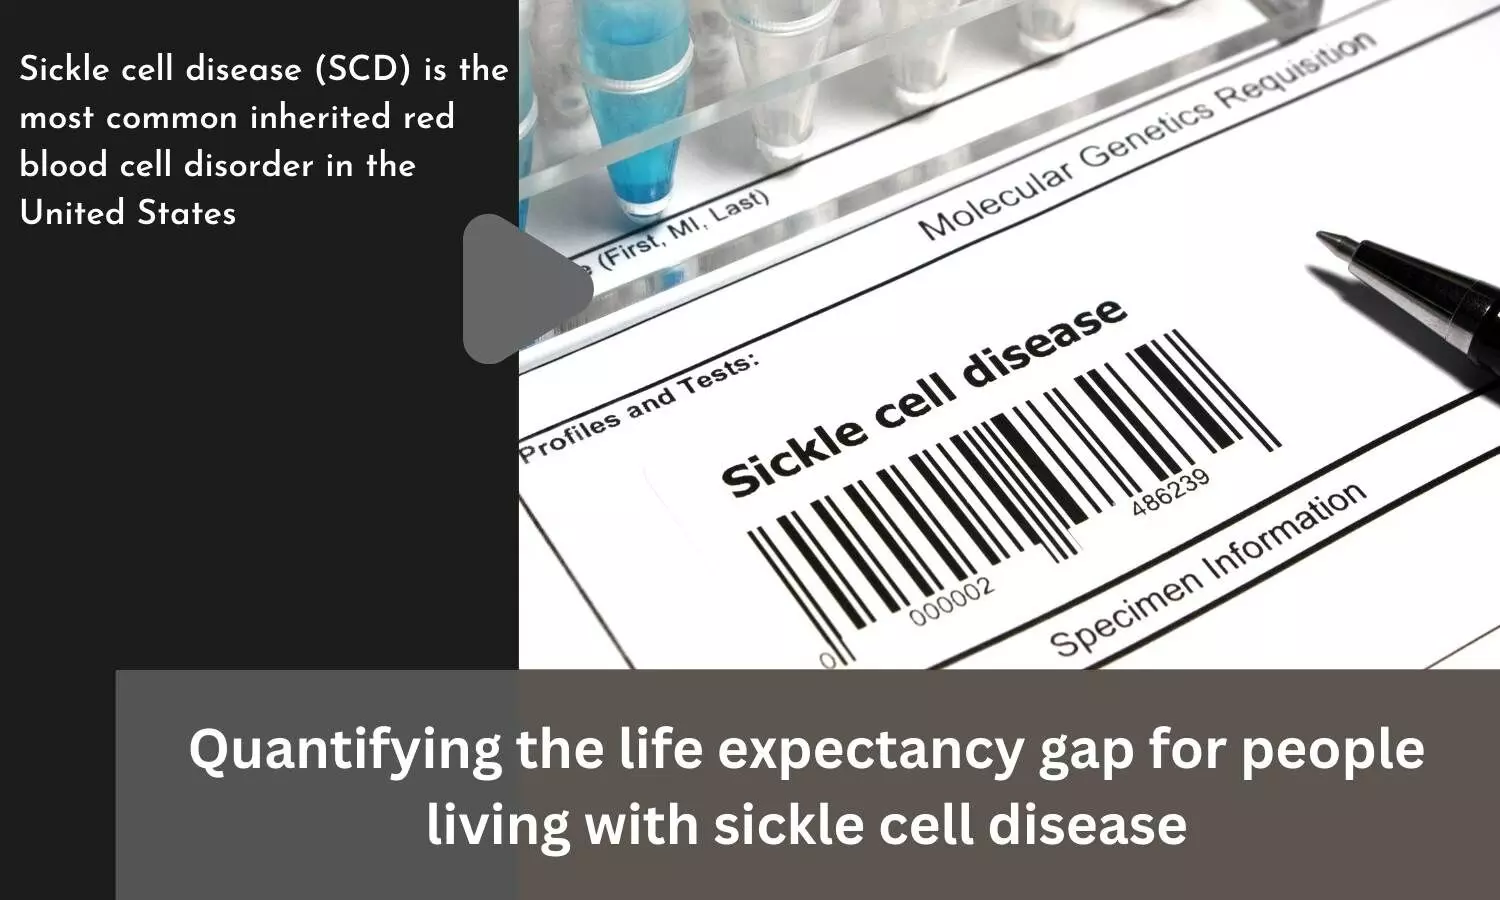 Quantifying the life expectancy gap for people living with sickle cell disease